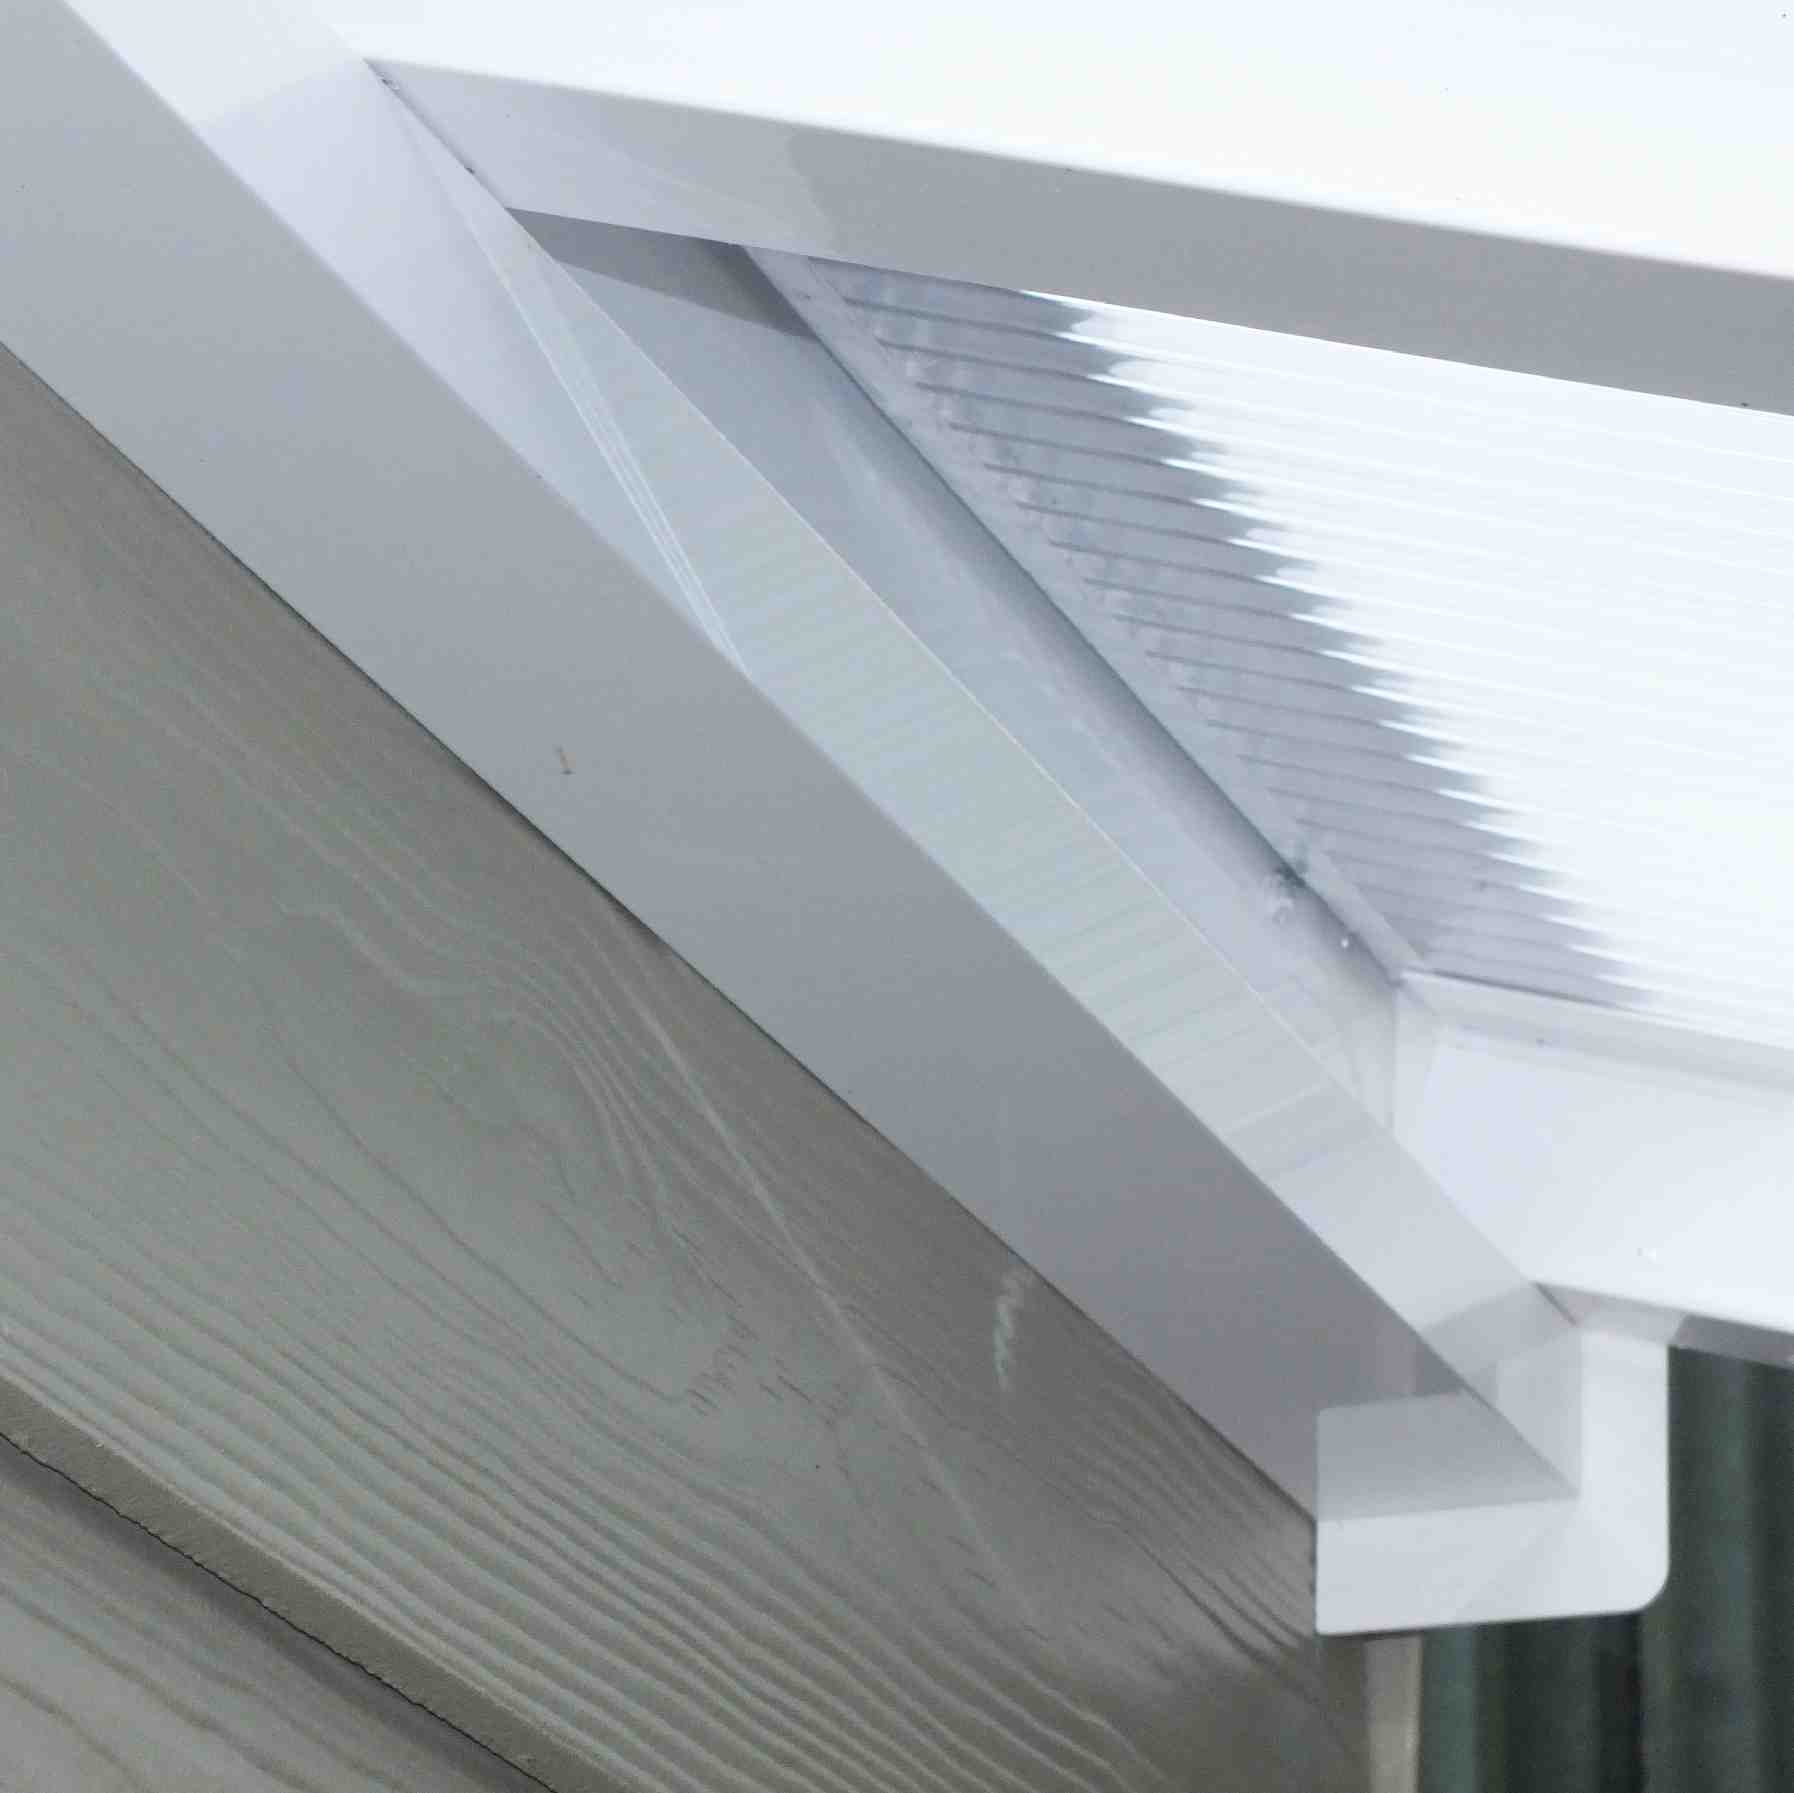 Great deals on Omega Verandah White with 16mm Polycarbonate Glazing - 6.3m (W) x 4.5m (P), (4) Supporting Posts